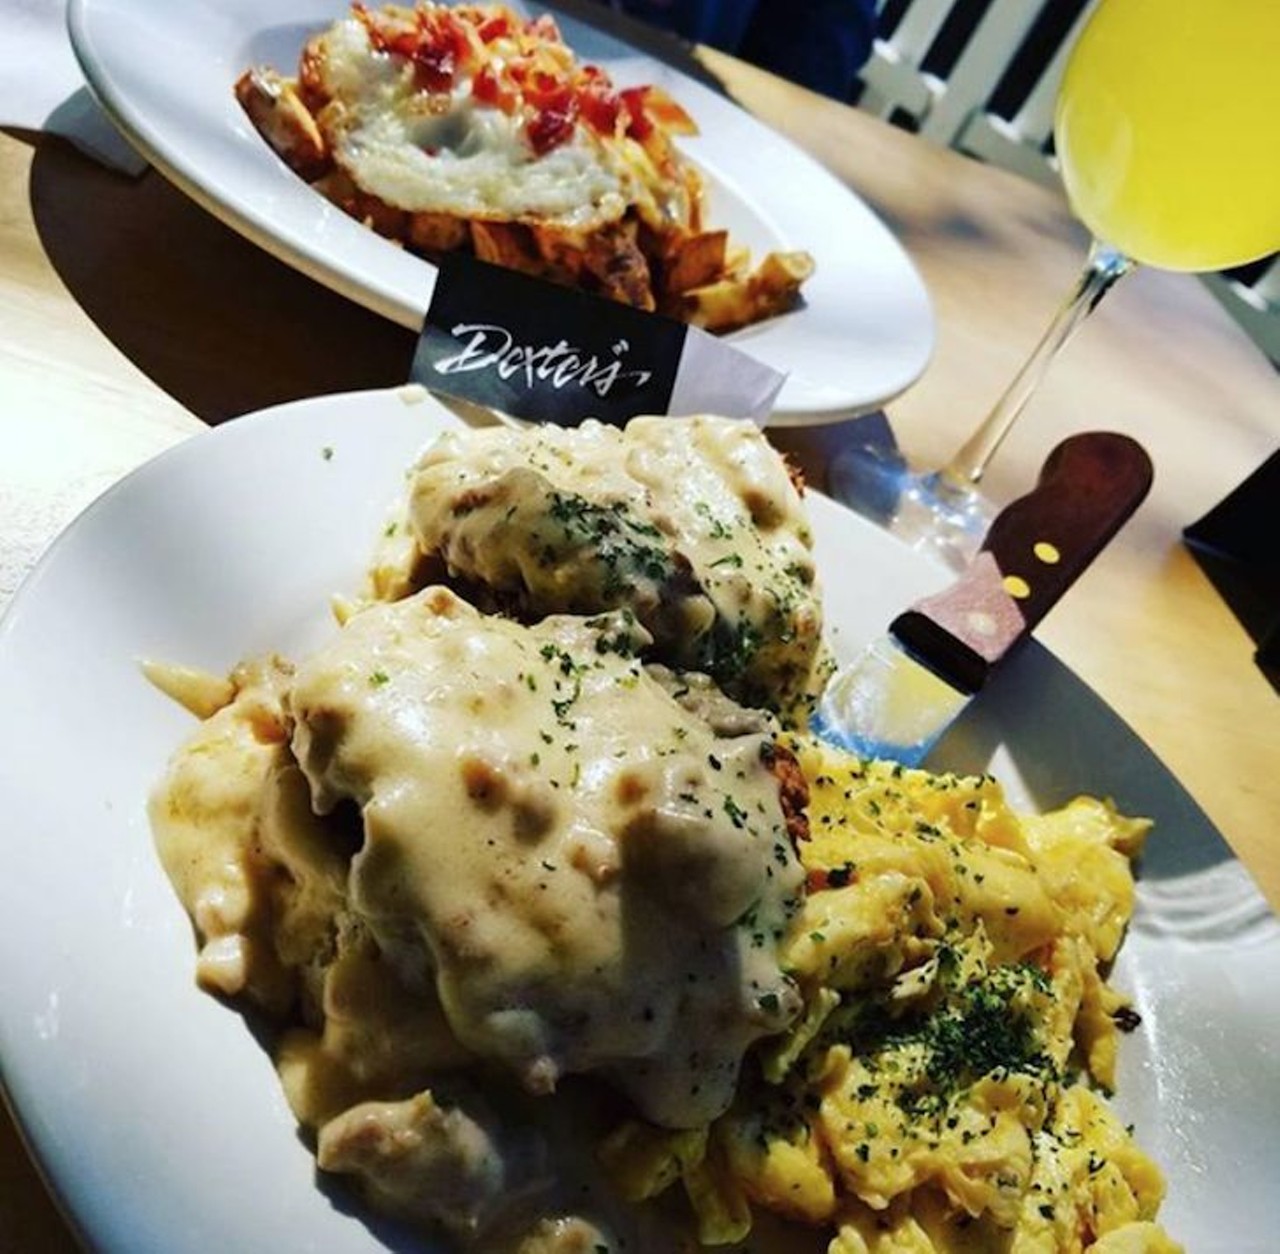 Dexter&#146;s 
Multiple locations
Dexter&#146;s is the O.G. Orlando brunch destination. Sunday brunch includes bottomless mimosas at the Winter Park and Windermere locations, but be sure to call ahead because this place is always switching things up. 
Photo via Dexter&#146;s/Instagram